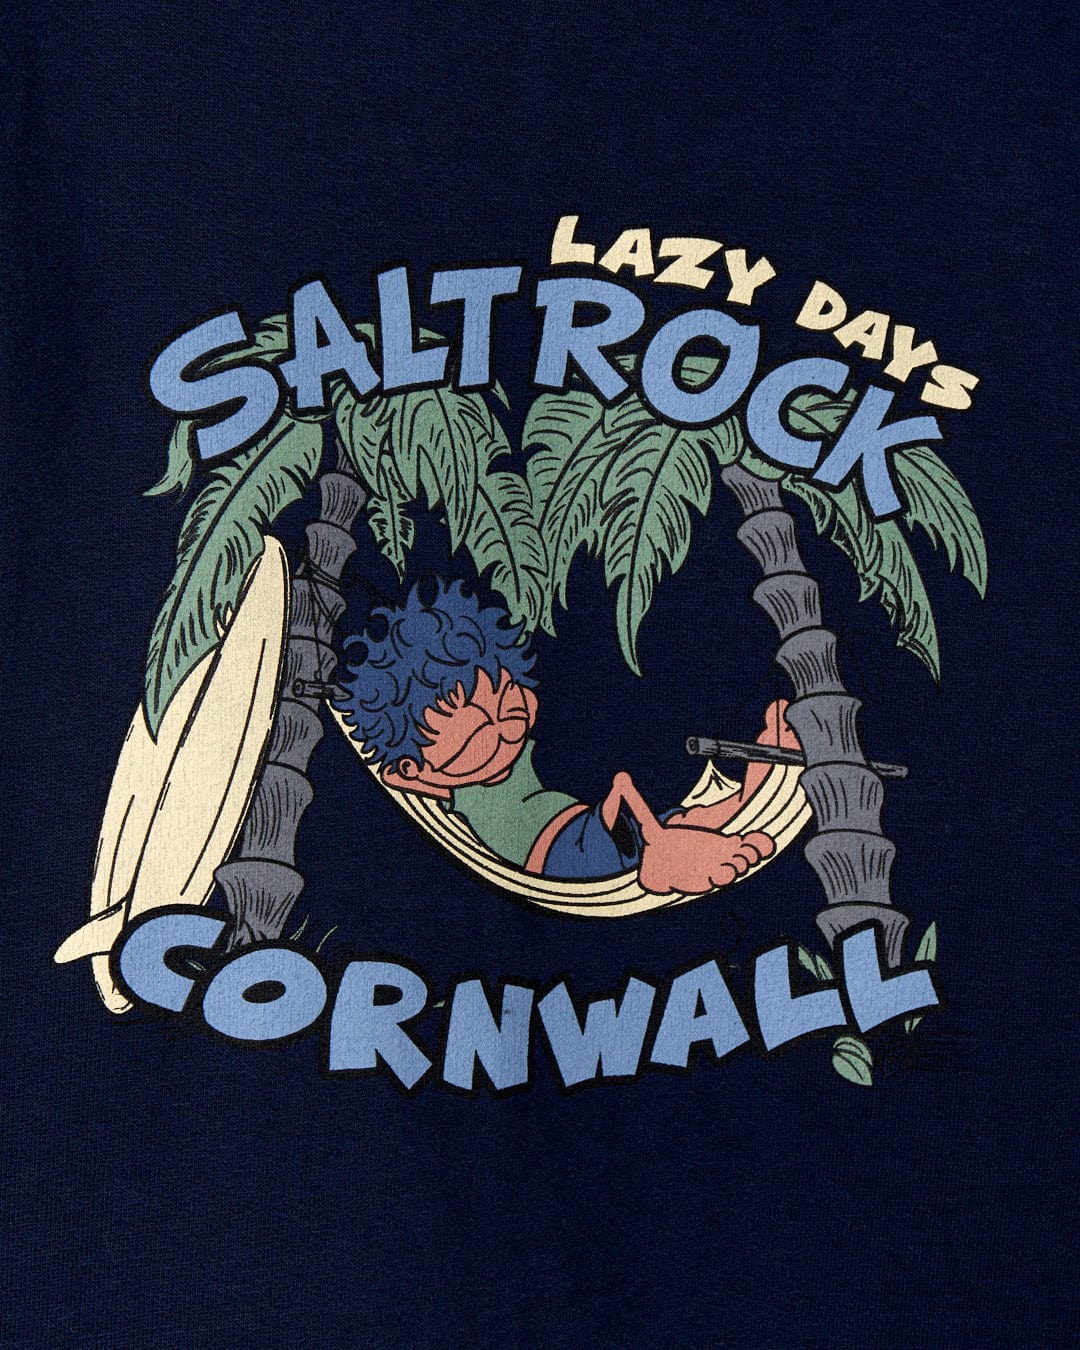 Graphic designed message "Lazy Location Cornwall - Recycled Kids Hoodie - Blue Saltrock" featuring two cartoon characters lounging in a hammock between palm trees on a navy blue background.